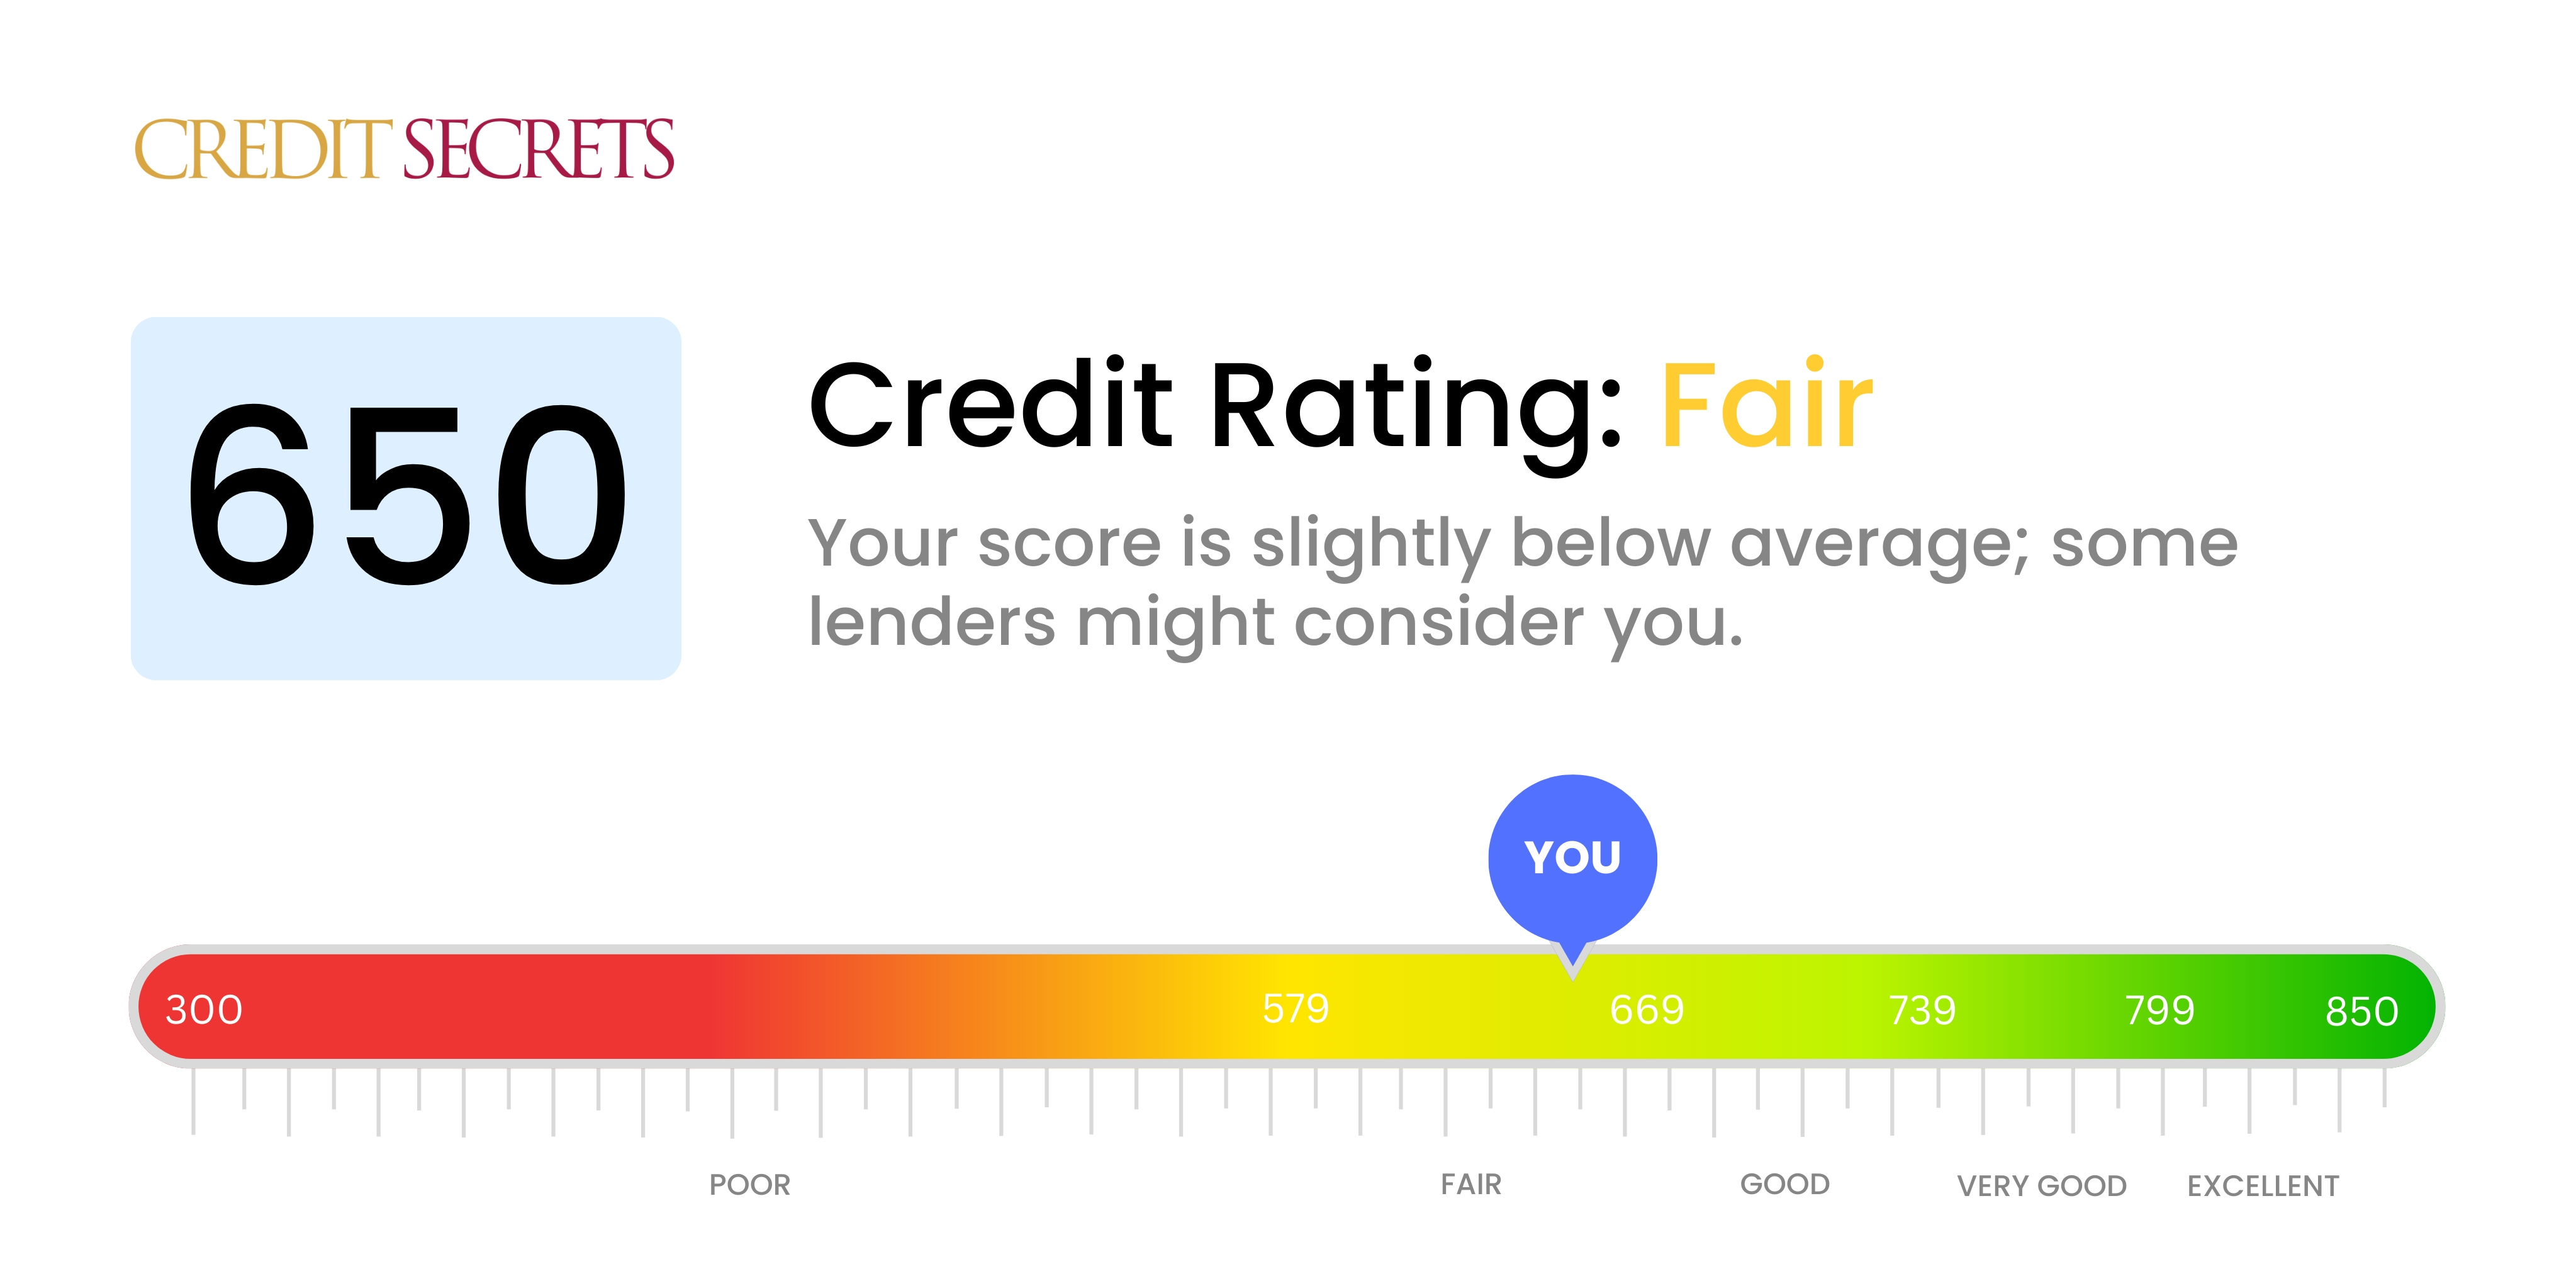 Is 650 a good credit score?